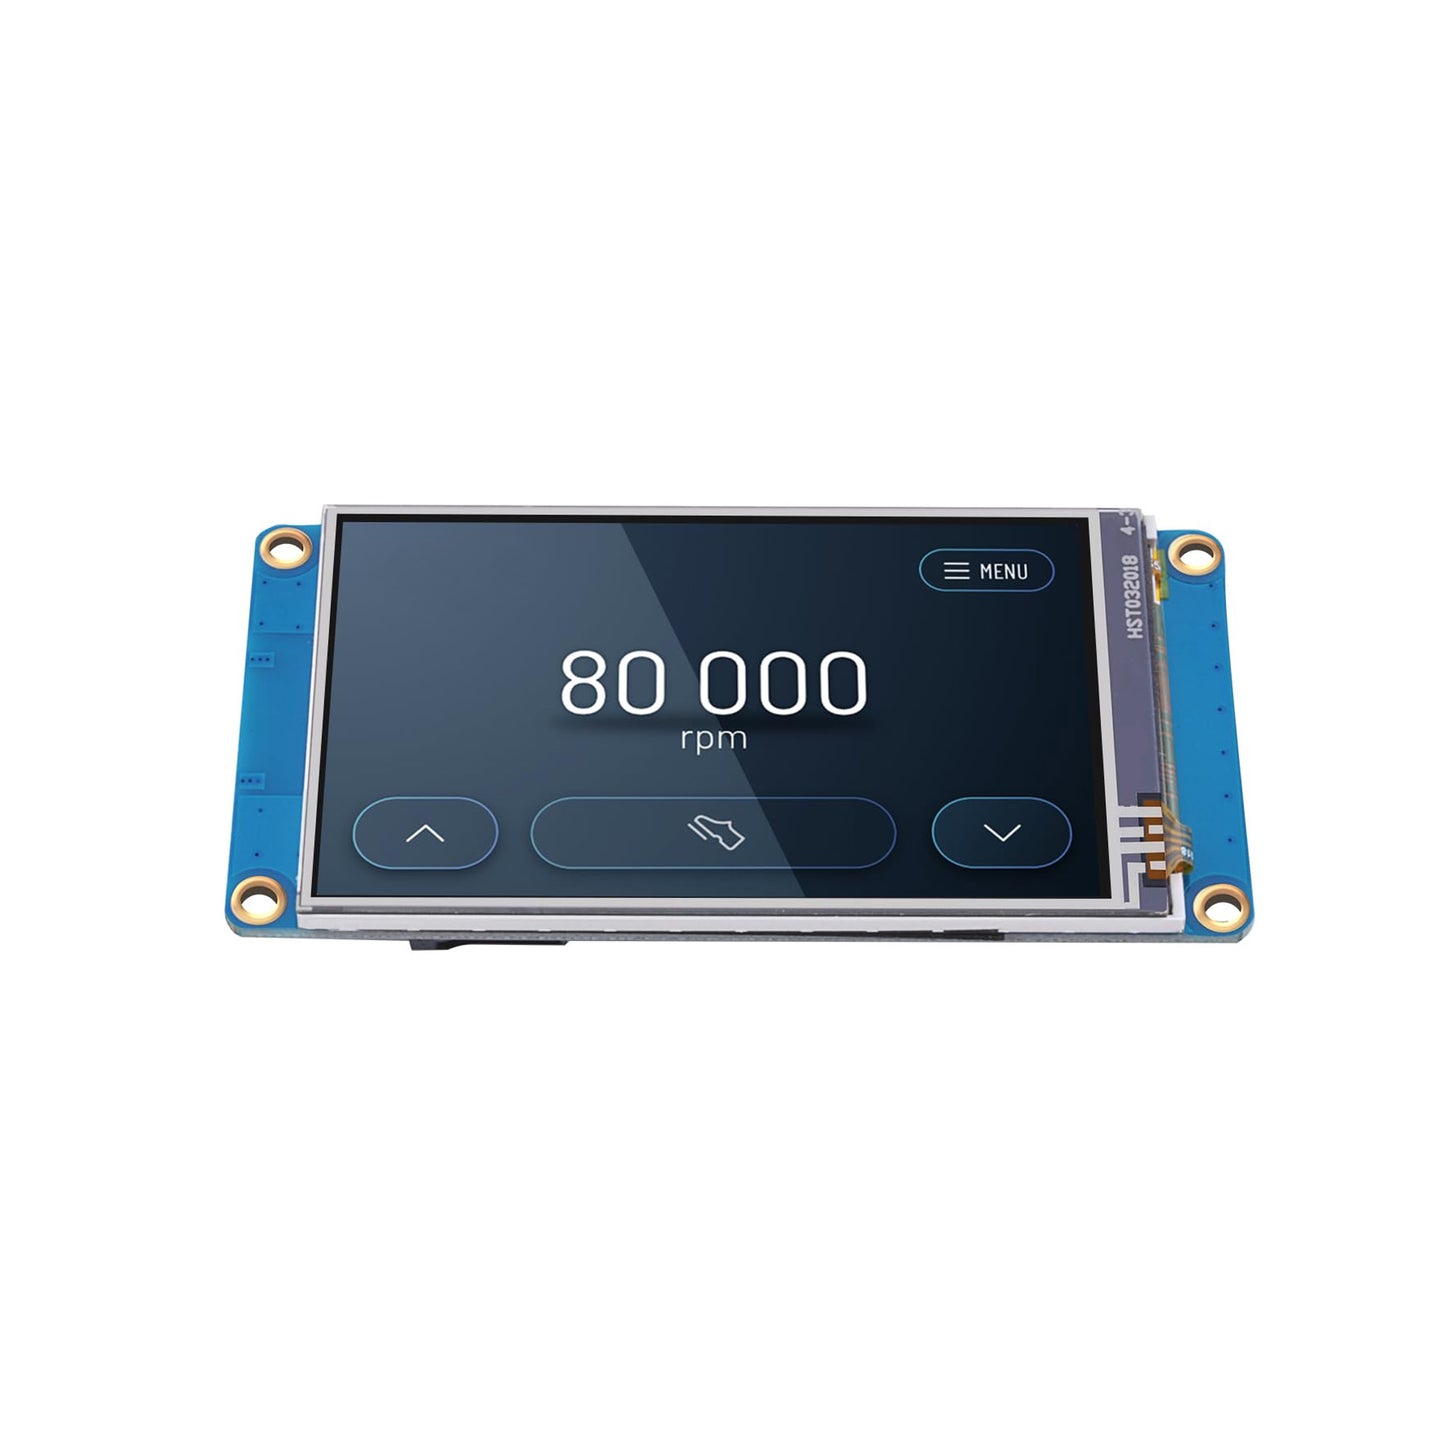 NX4024T032 Nextion 3.2 Inch Display 3.2″ BASIC HMI TFT LCD Touch Display Module - RS103 - REES52